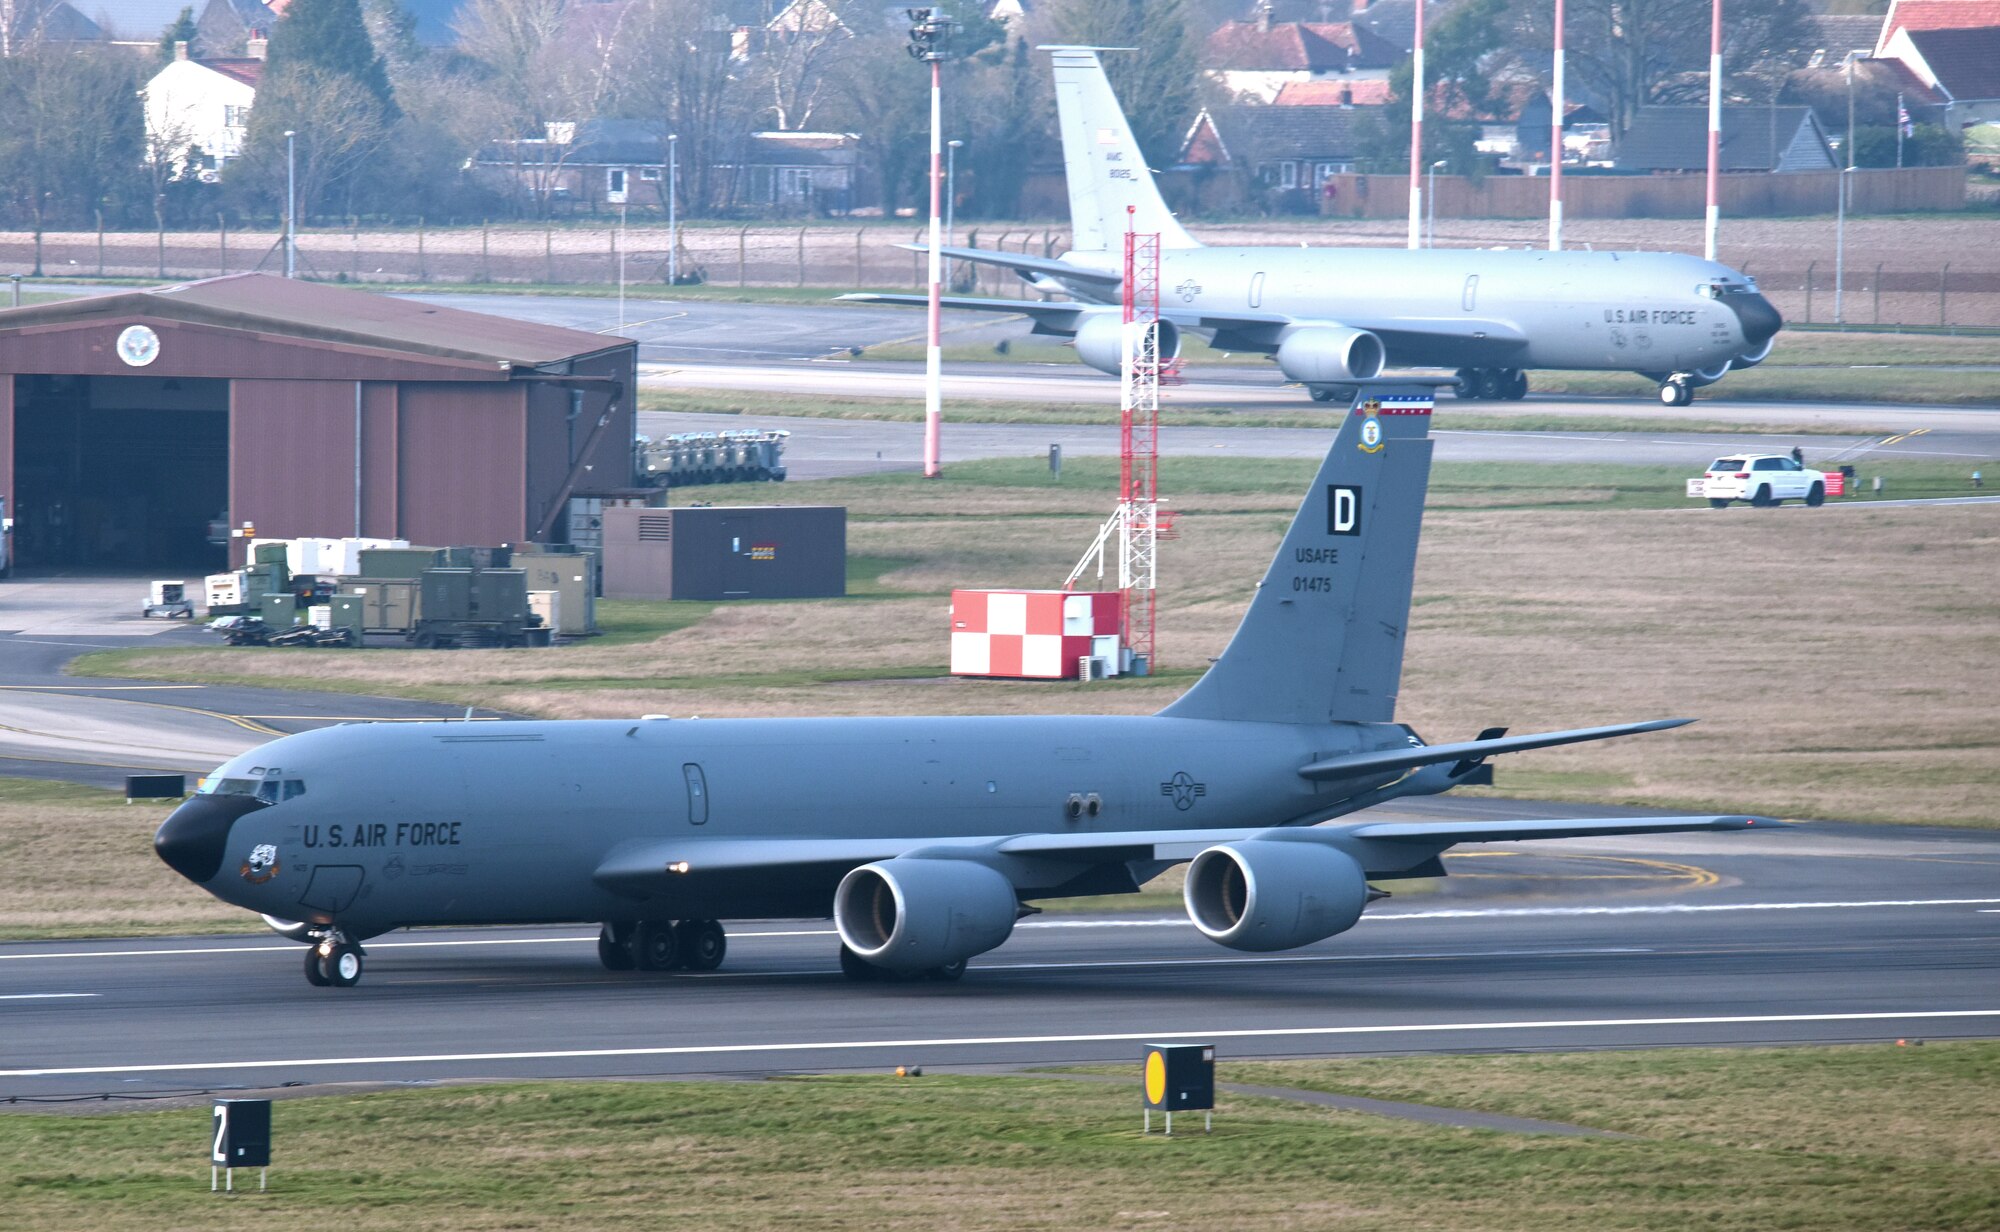 A U.S. Air Force KC-135 Stratotanker assigned to the 100th Air Refueling Wing taxis down the runway as it prepares to take off from Royal Air Force Mildenhall, England, March 10, 2022. The KC-135 provides the core aerial refueling capability for the U.S. Air Force and enhances its capability to accomplish the primary mission of global reach. (U.S. Air Force photo by Karen Abeyasekere)